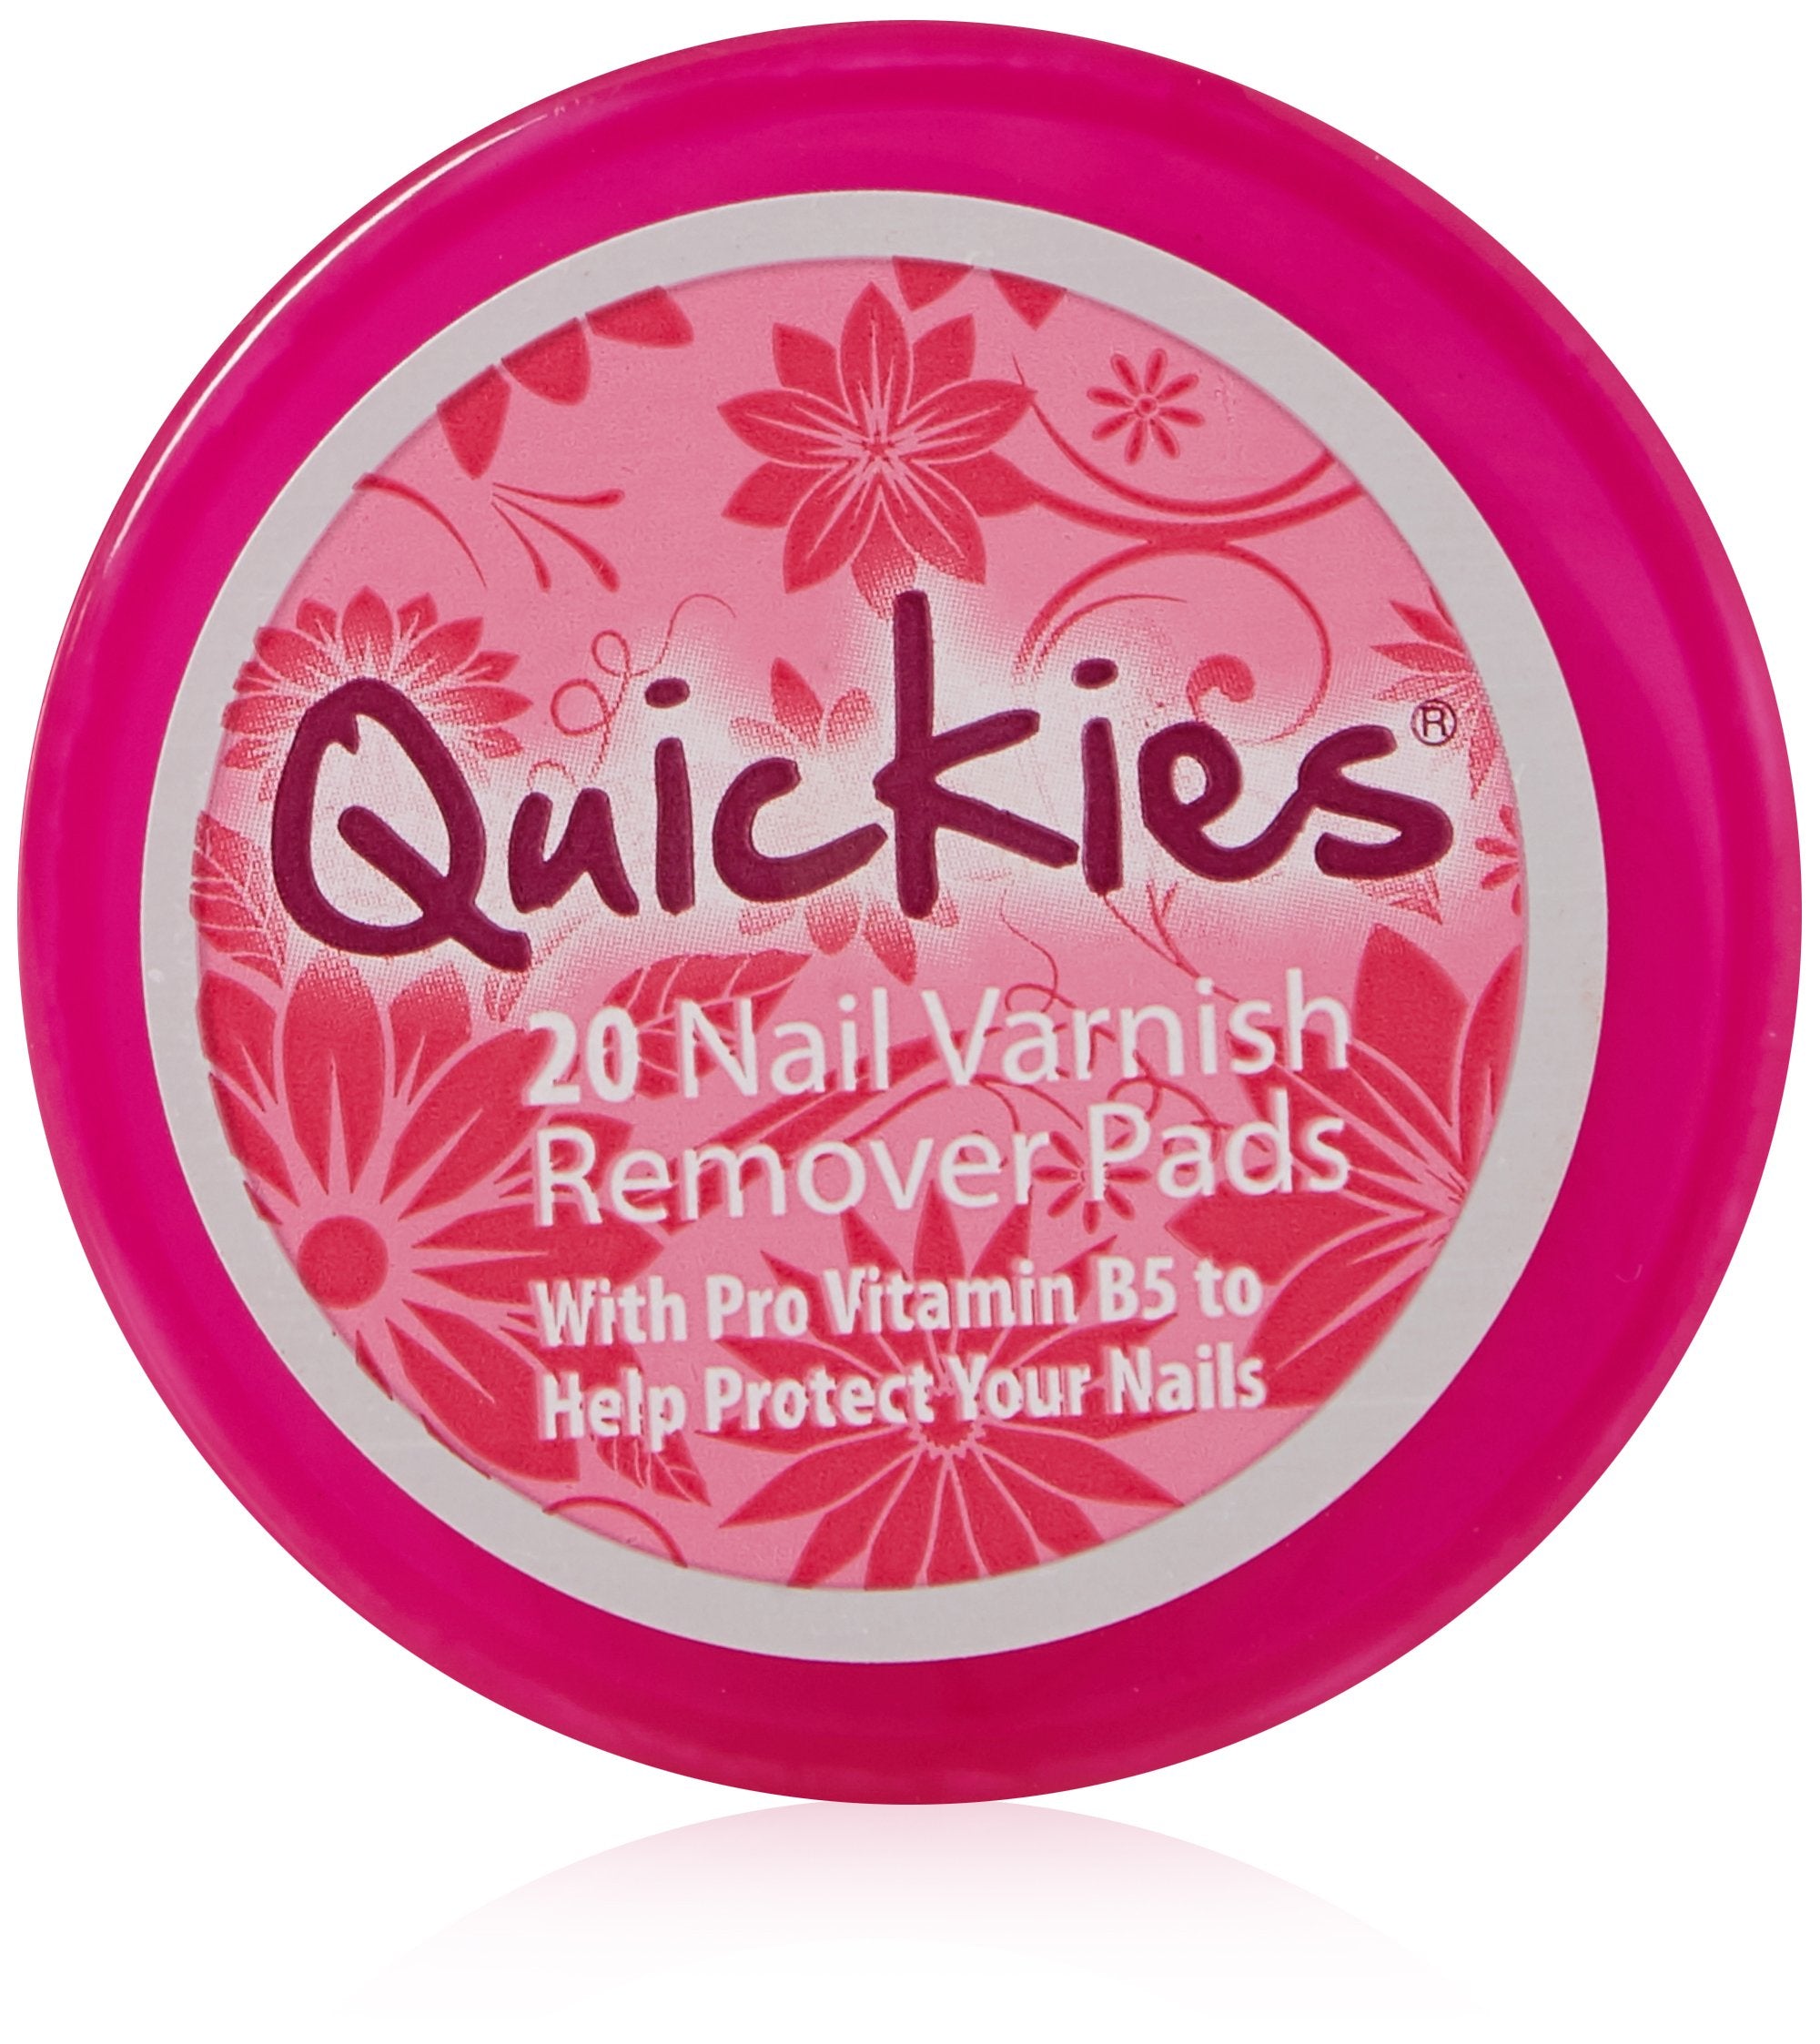 Quickies Nail Varnish Remover Pads, 20 each